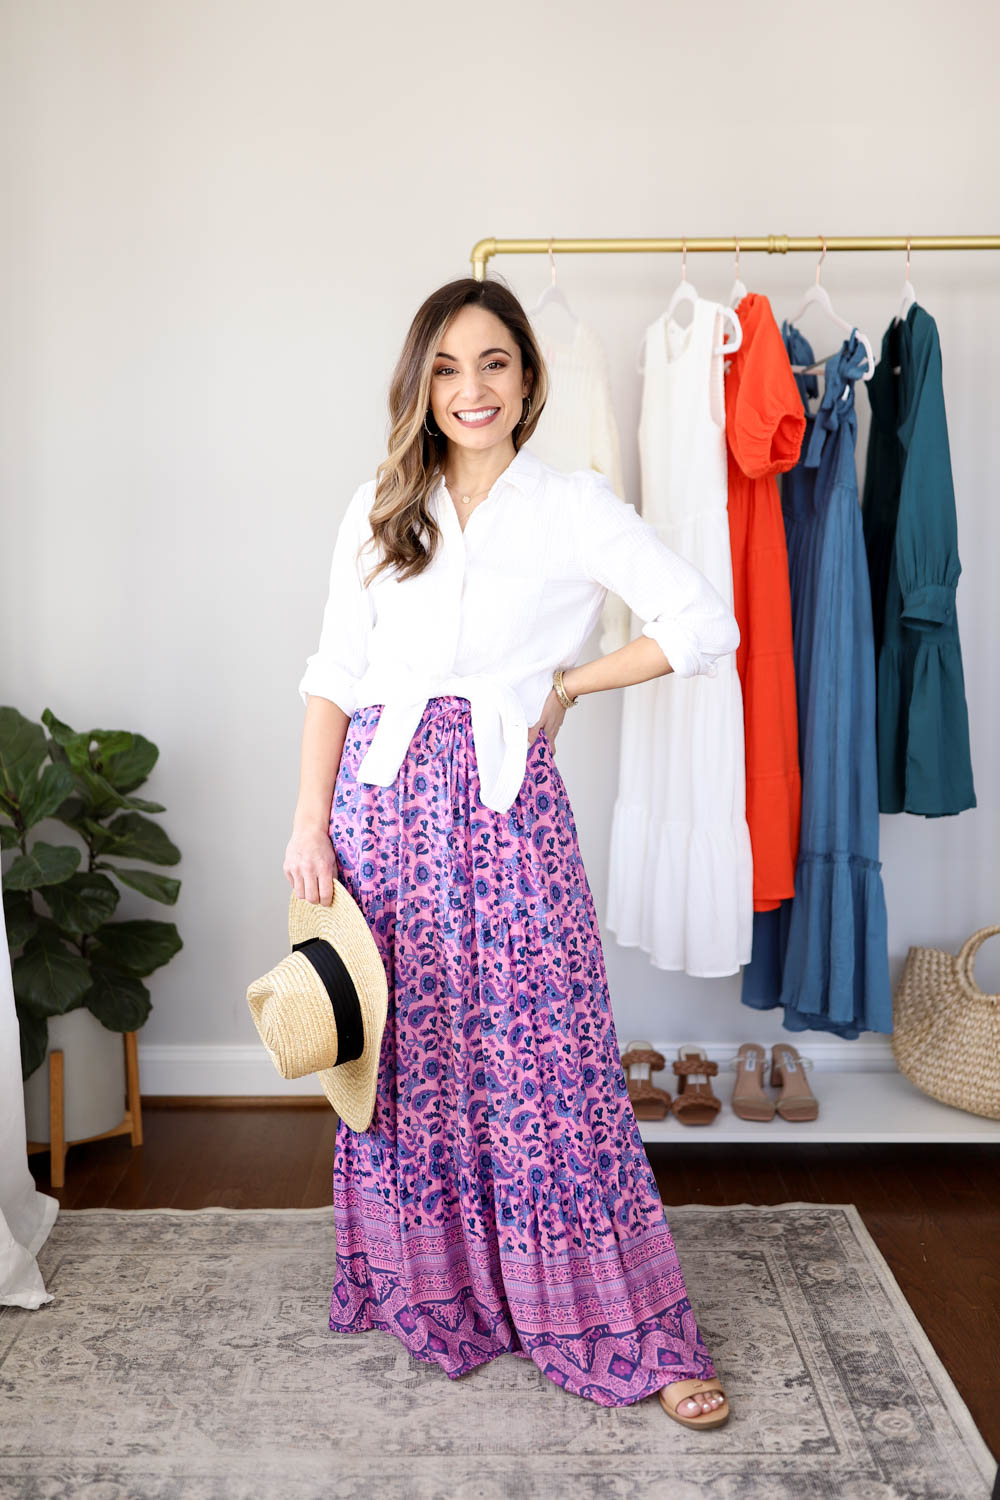 Resort Wear for Warm-Weather Winter Vacations - Sunshine Style